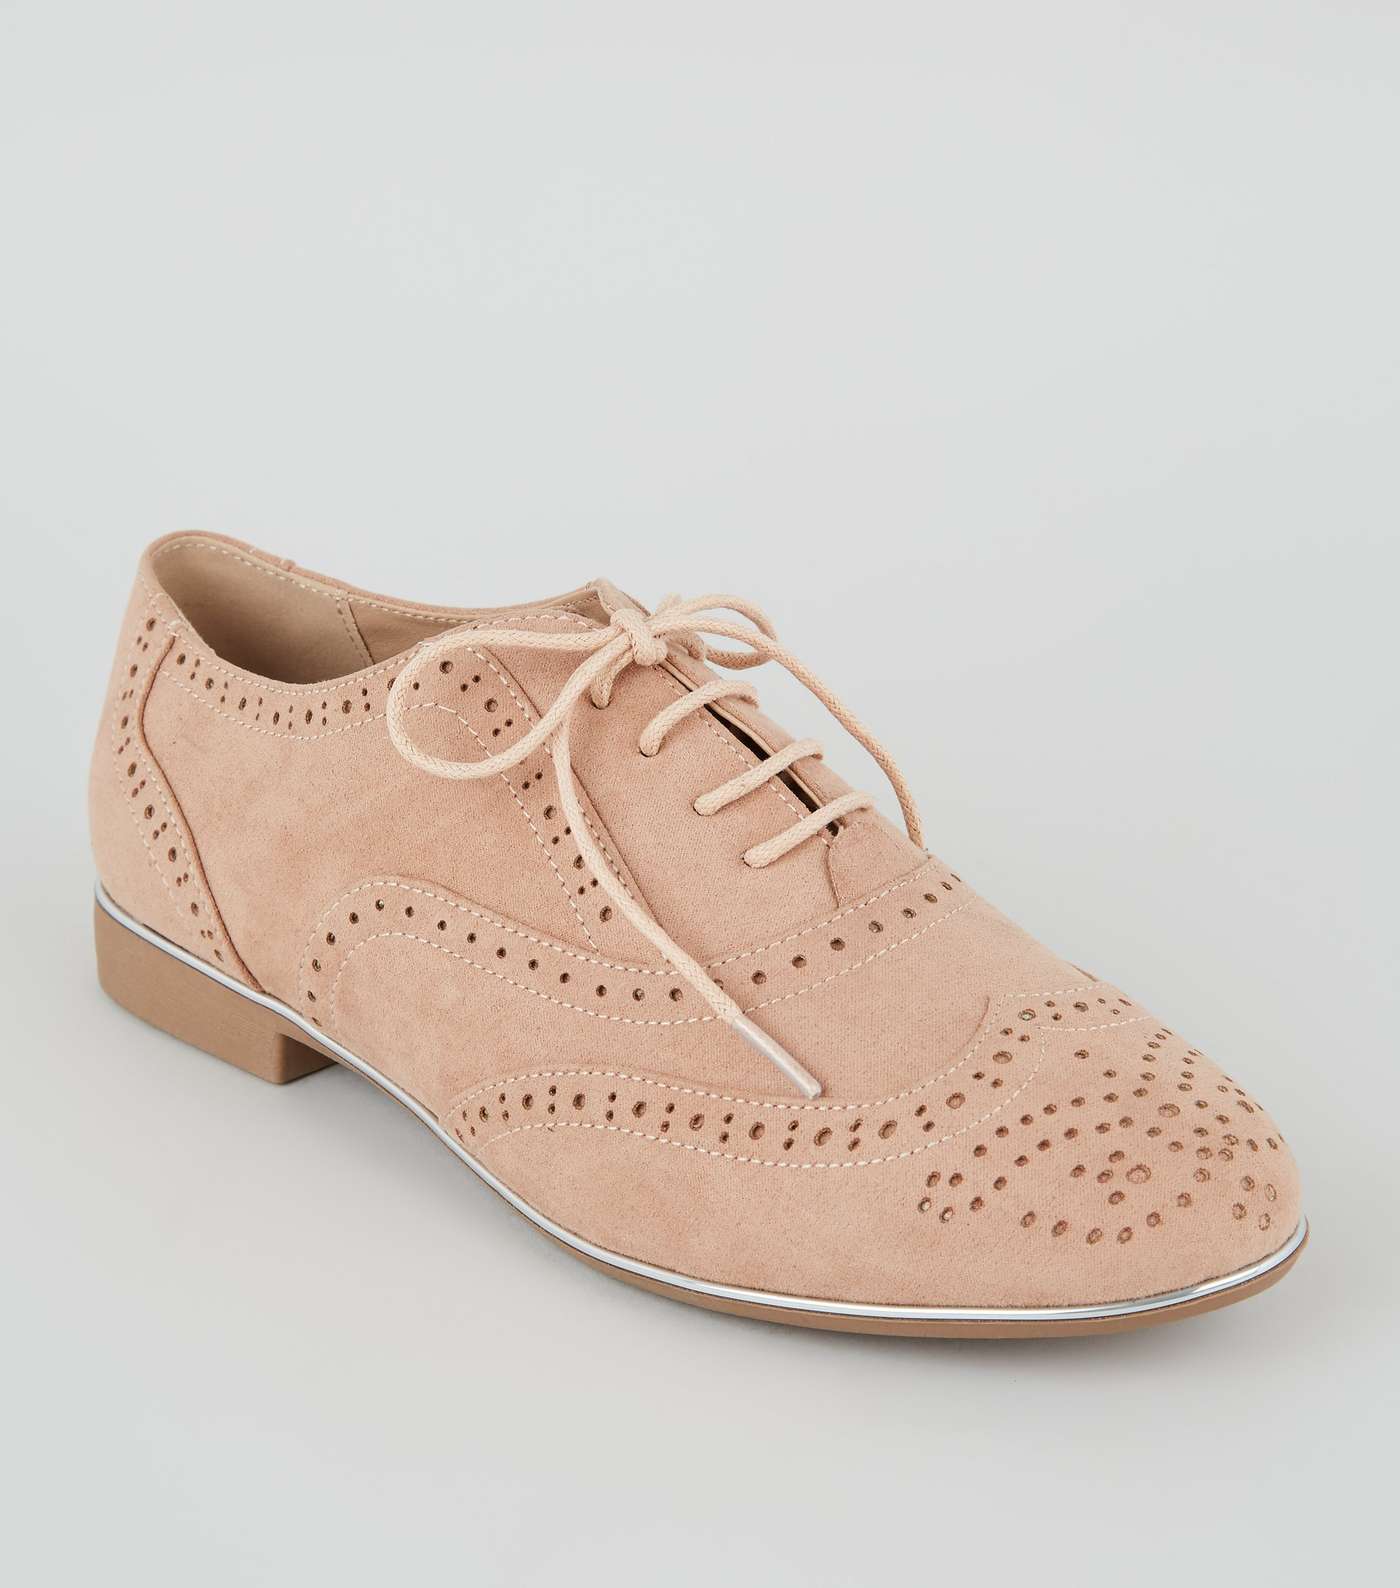 Wide Fit Nude Suedette Piped Edge Brogues